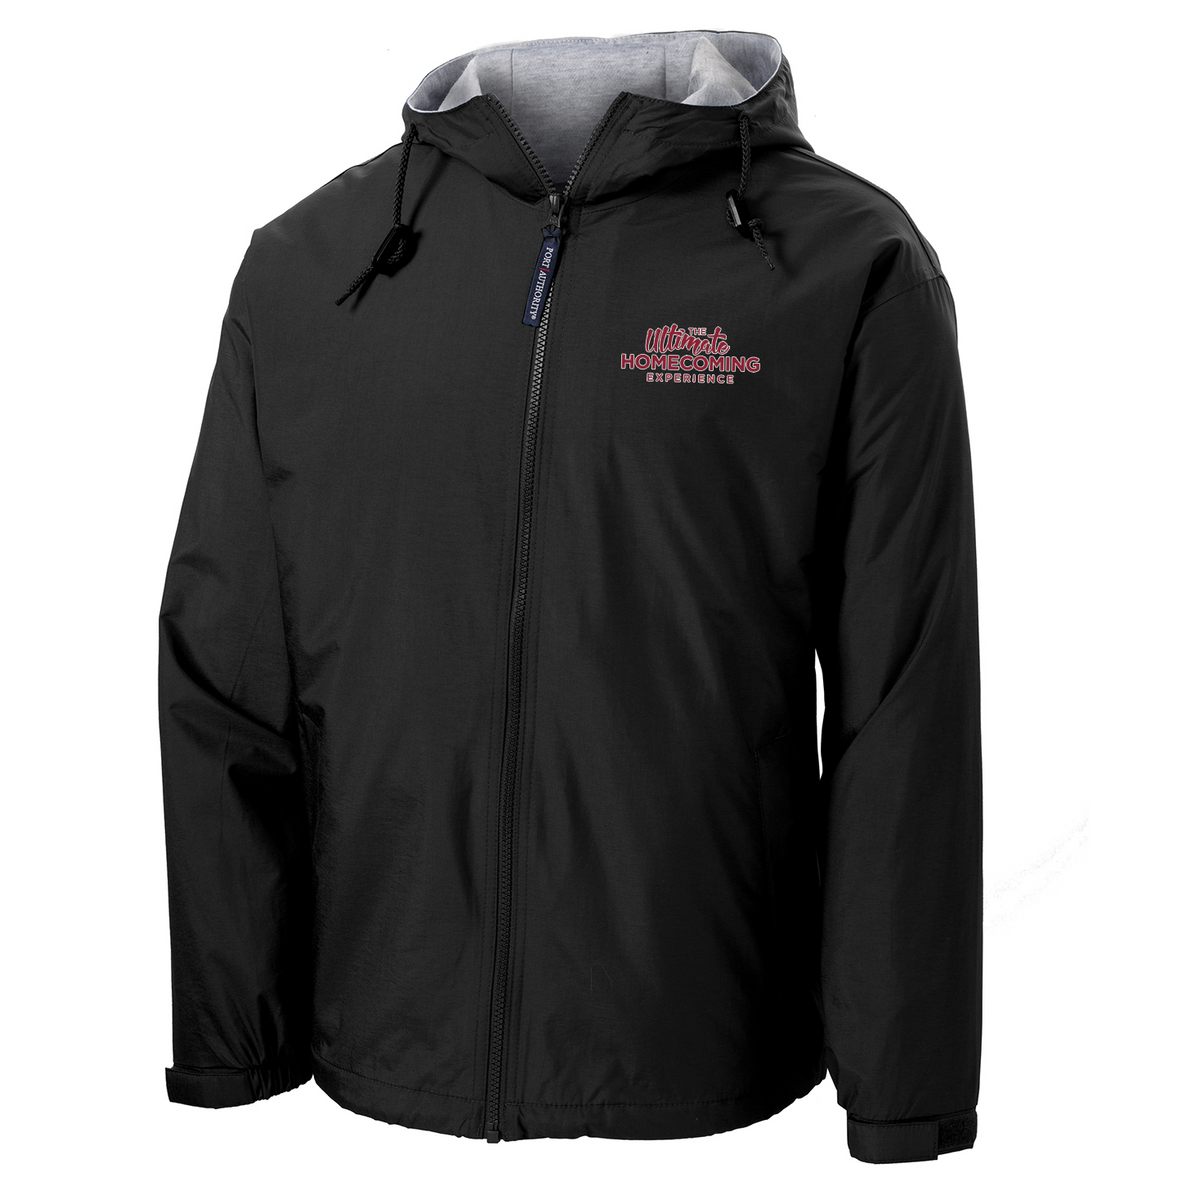 NC Central University Homecoming Hooded Jacket